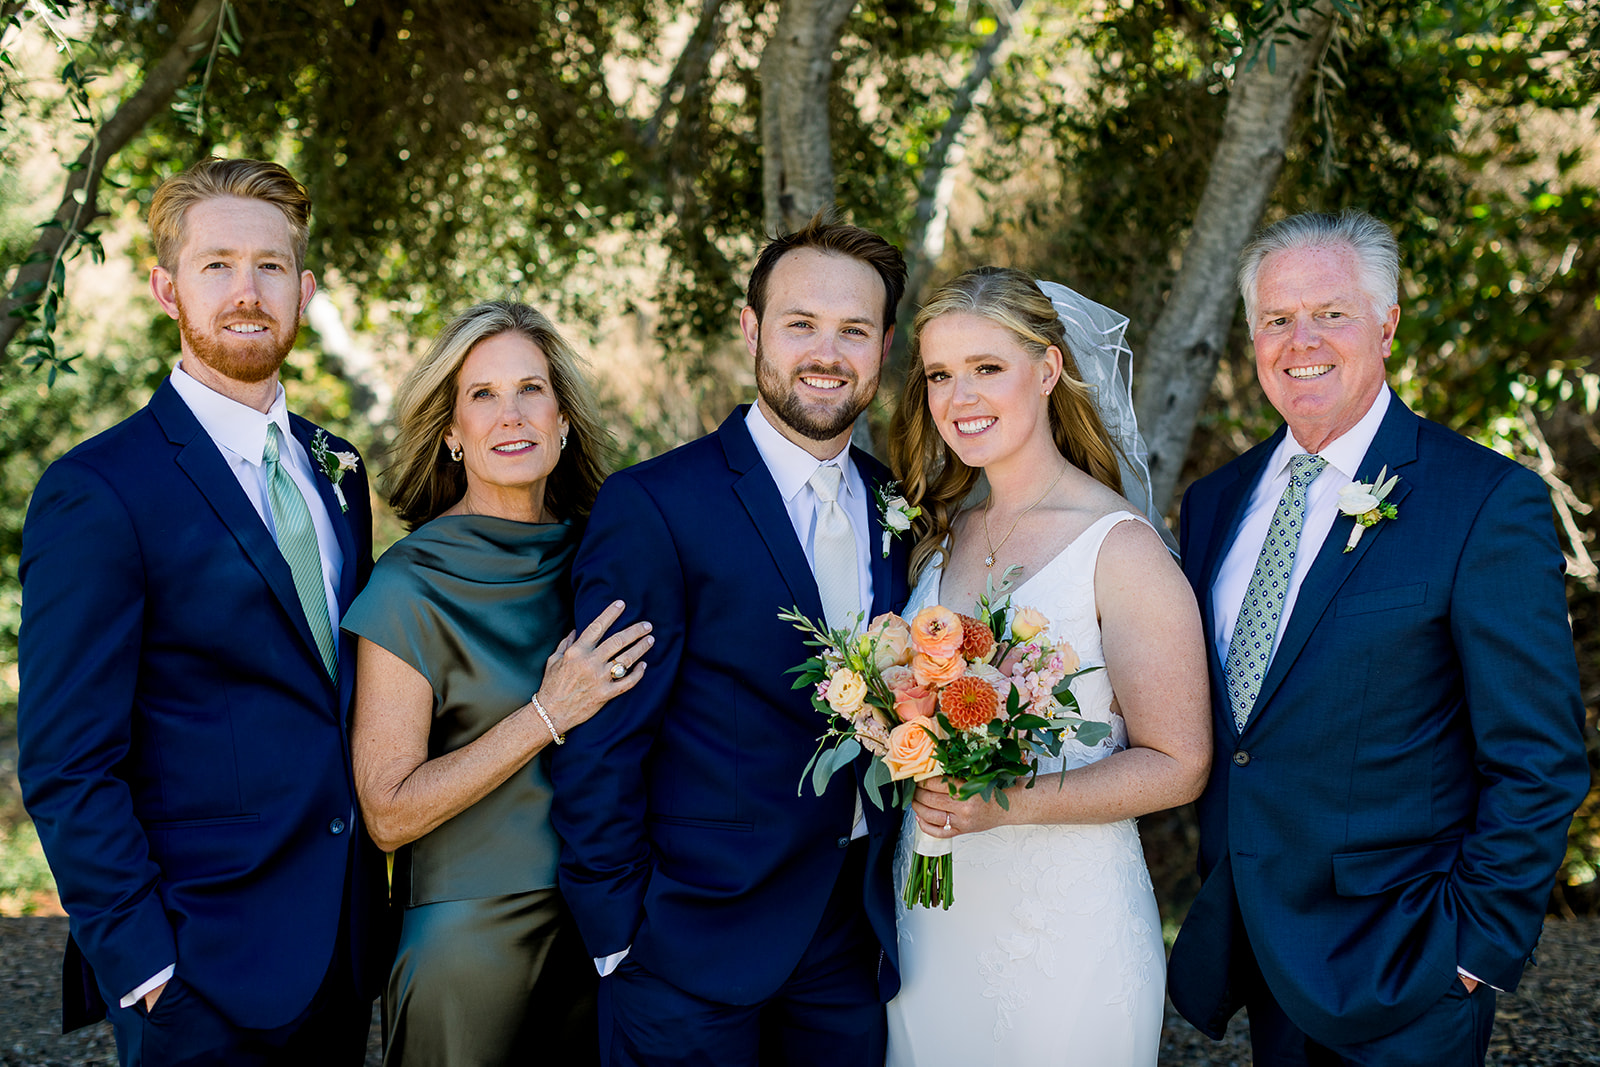 A heartwarming family photo featuring the bride and groom on their wedding day at Higuera Ranch. The couple is surrounded by loved ones, sharing smiles and joy, capturing a beautiful moment of togetherness amidst the rustic charm of the ranch setting